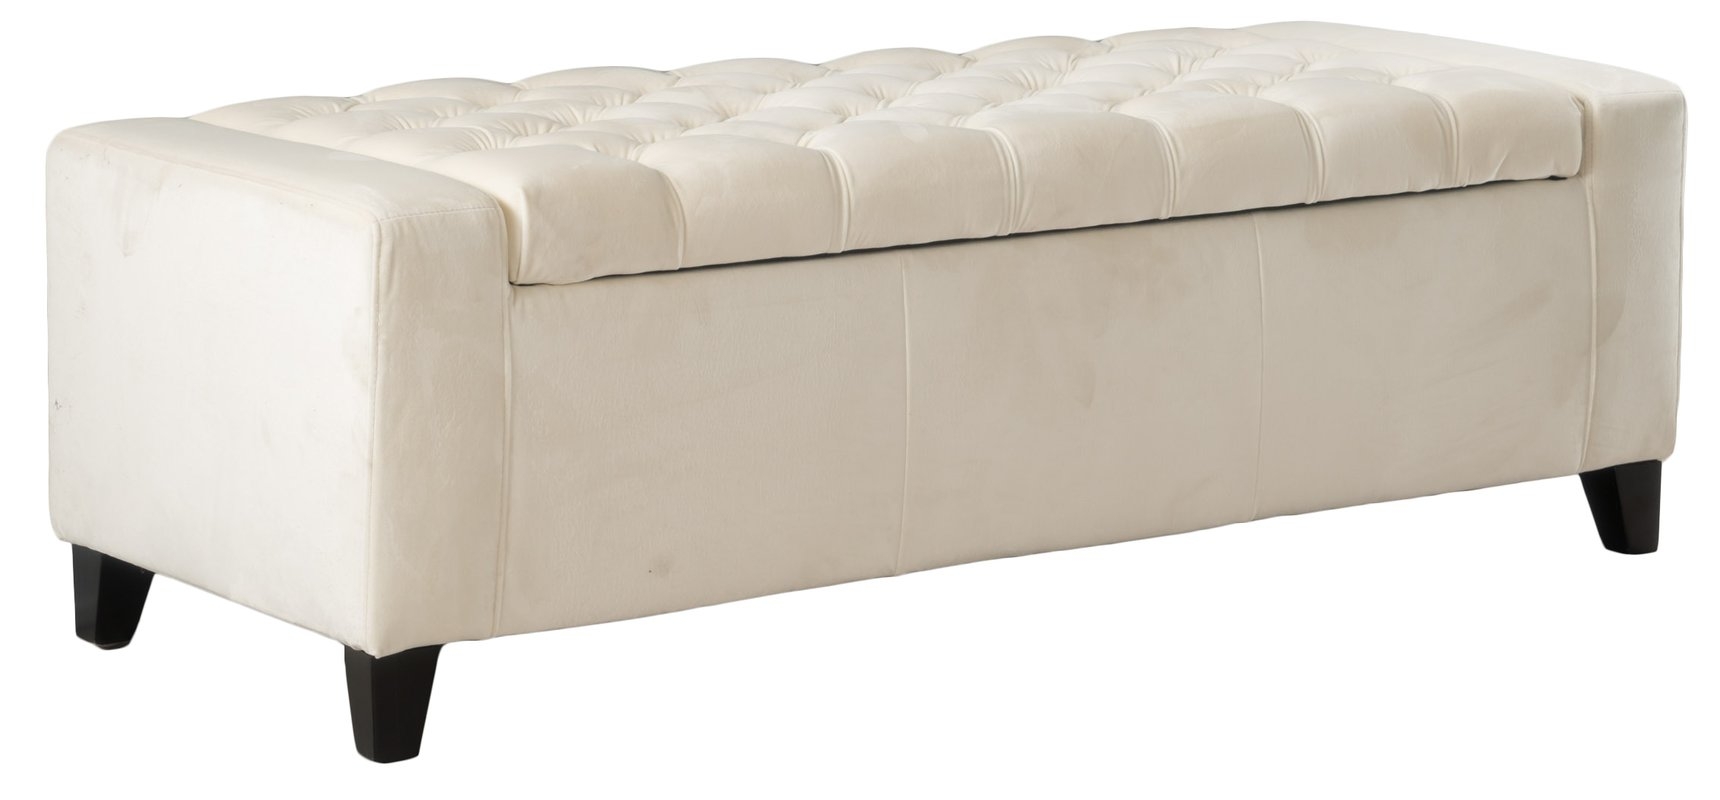 Ilchester Upholstered Storage Bench / Ivory - Image 1